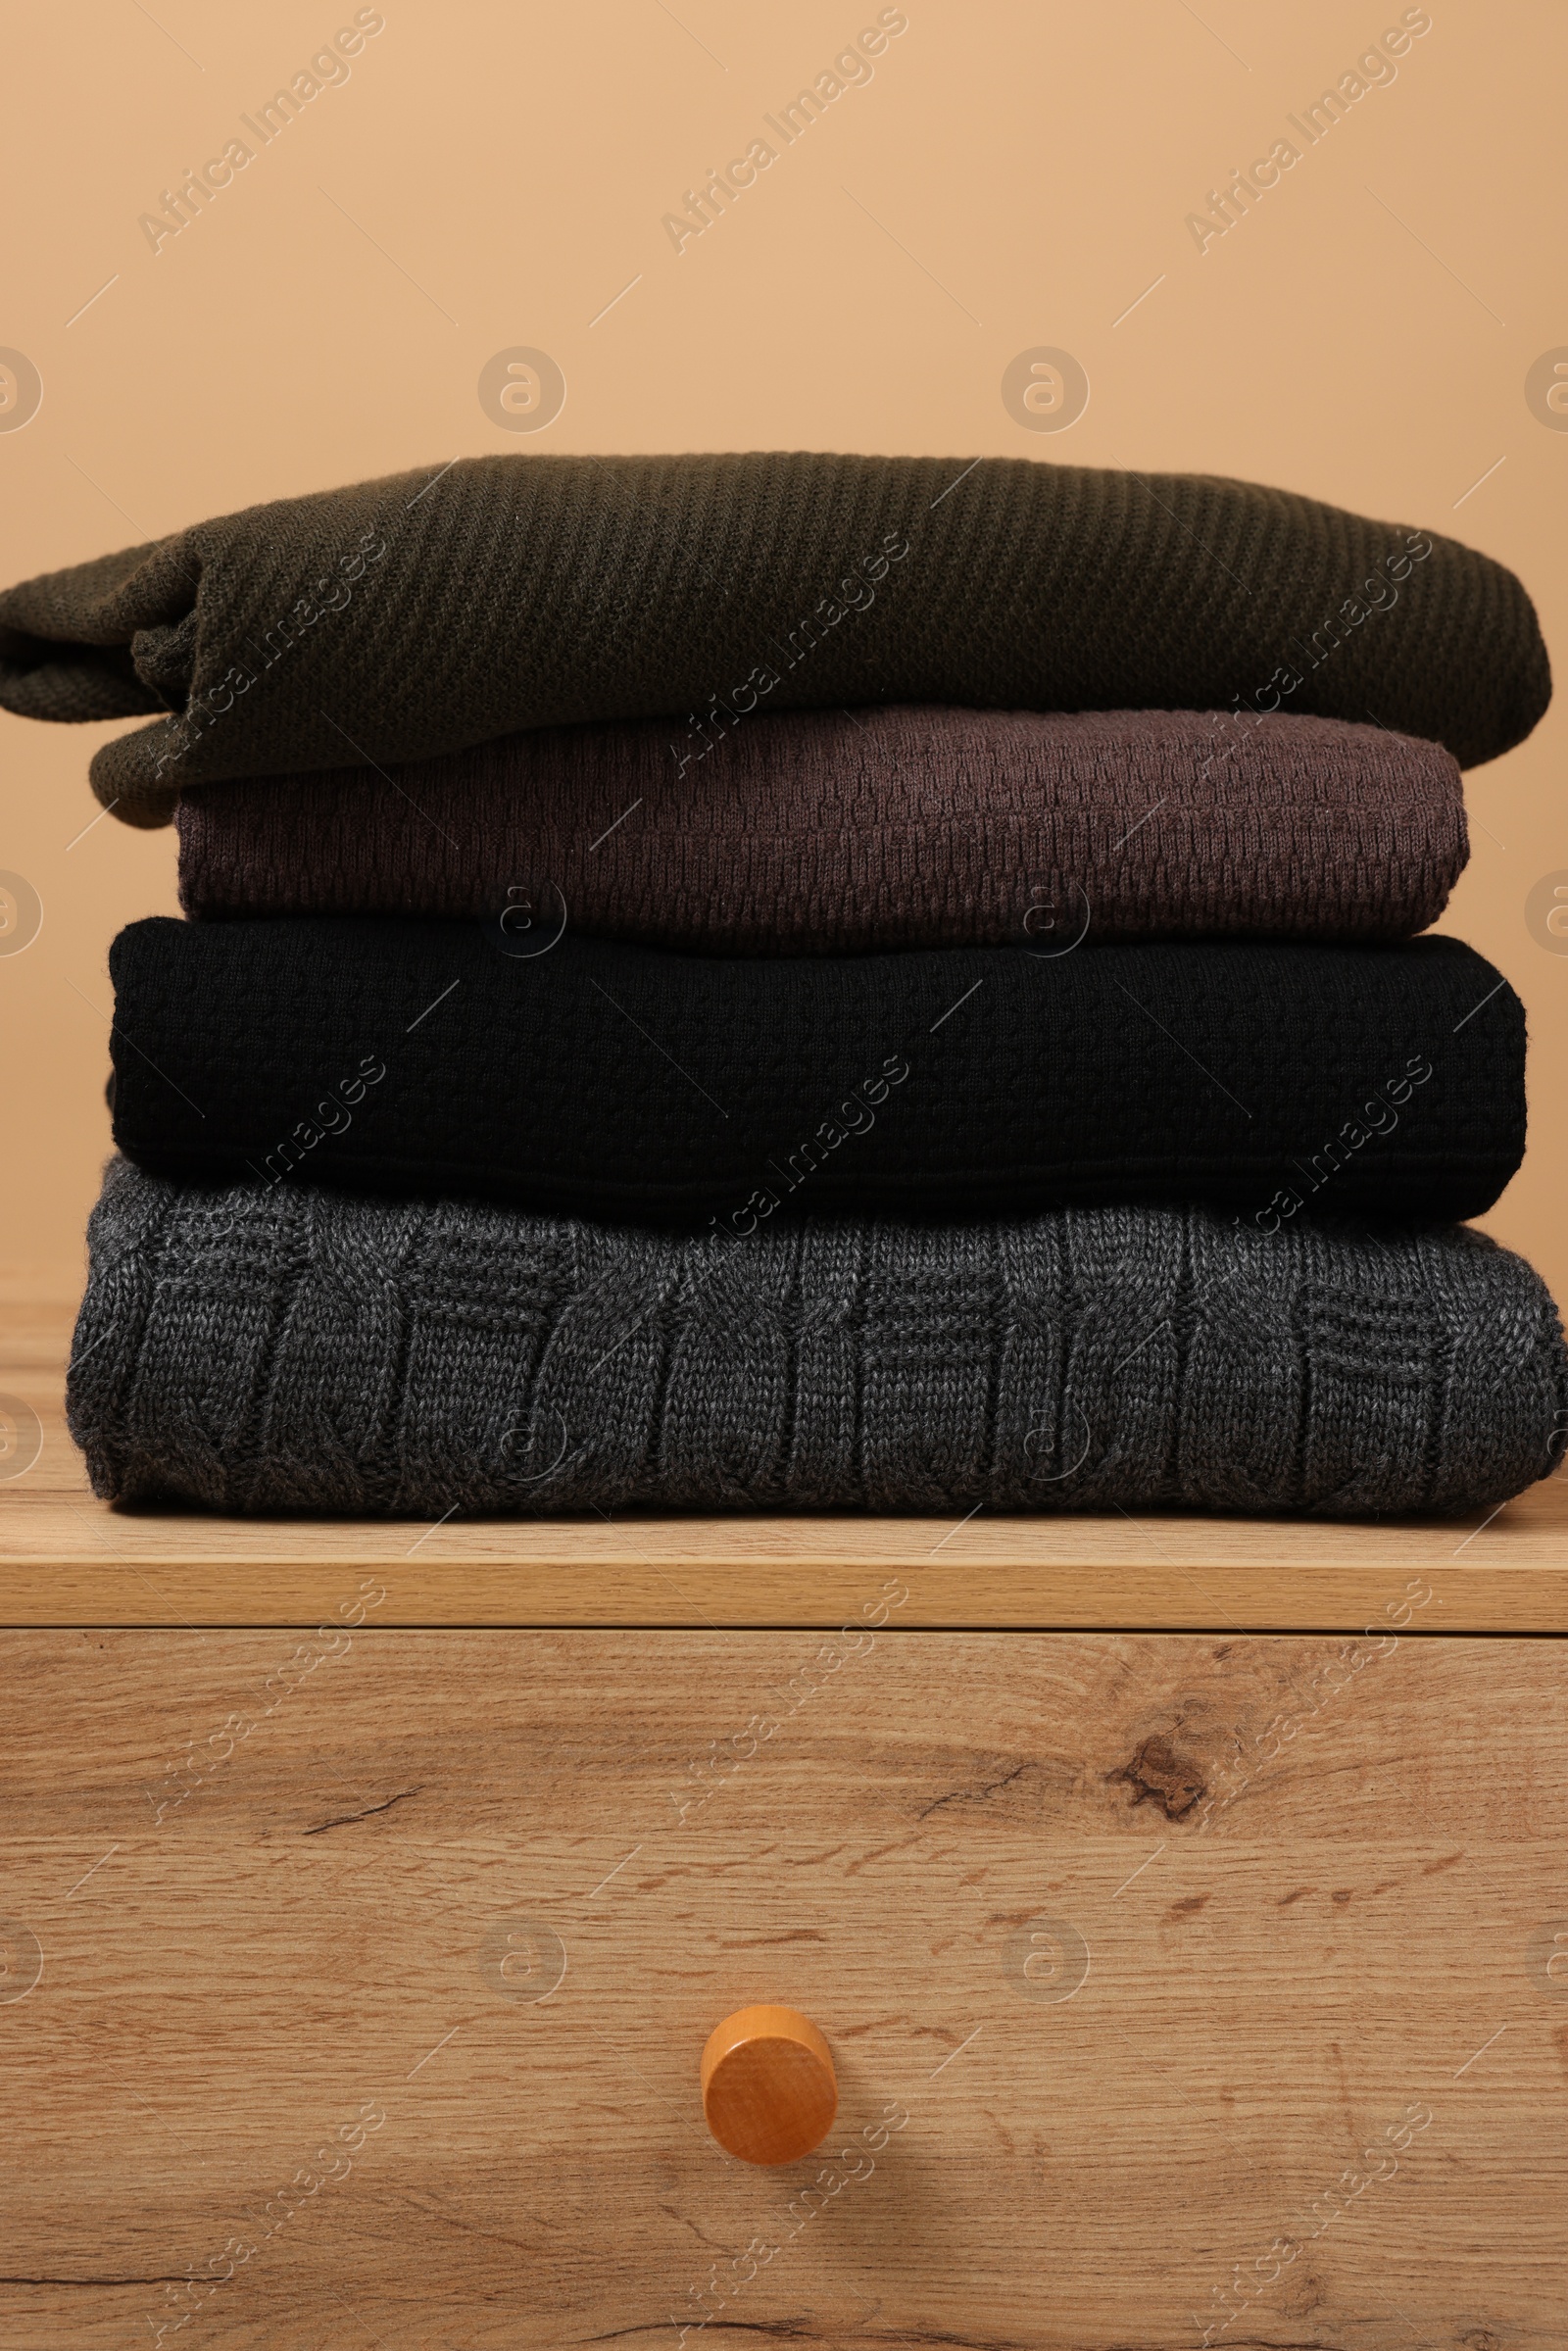 Photo of Different casual sweaters on chest of drawers against light brown background